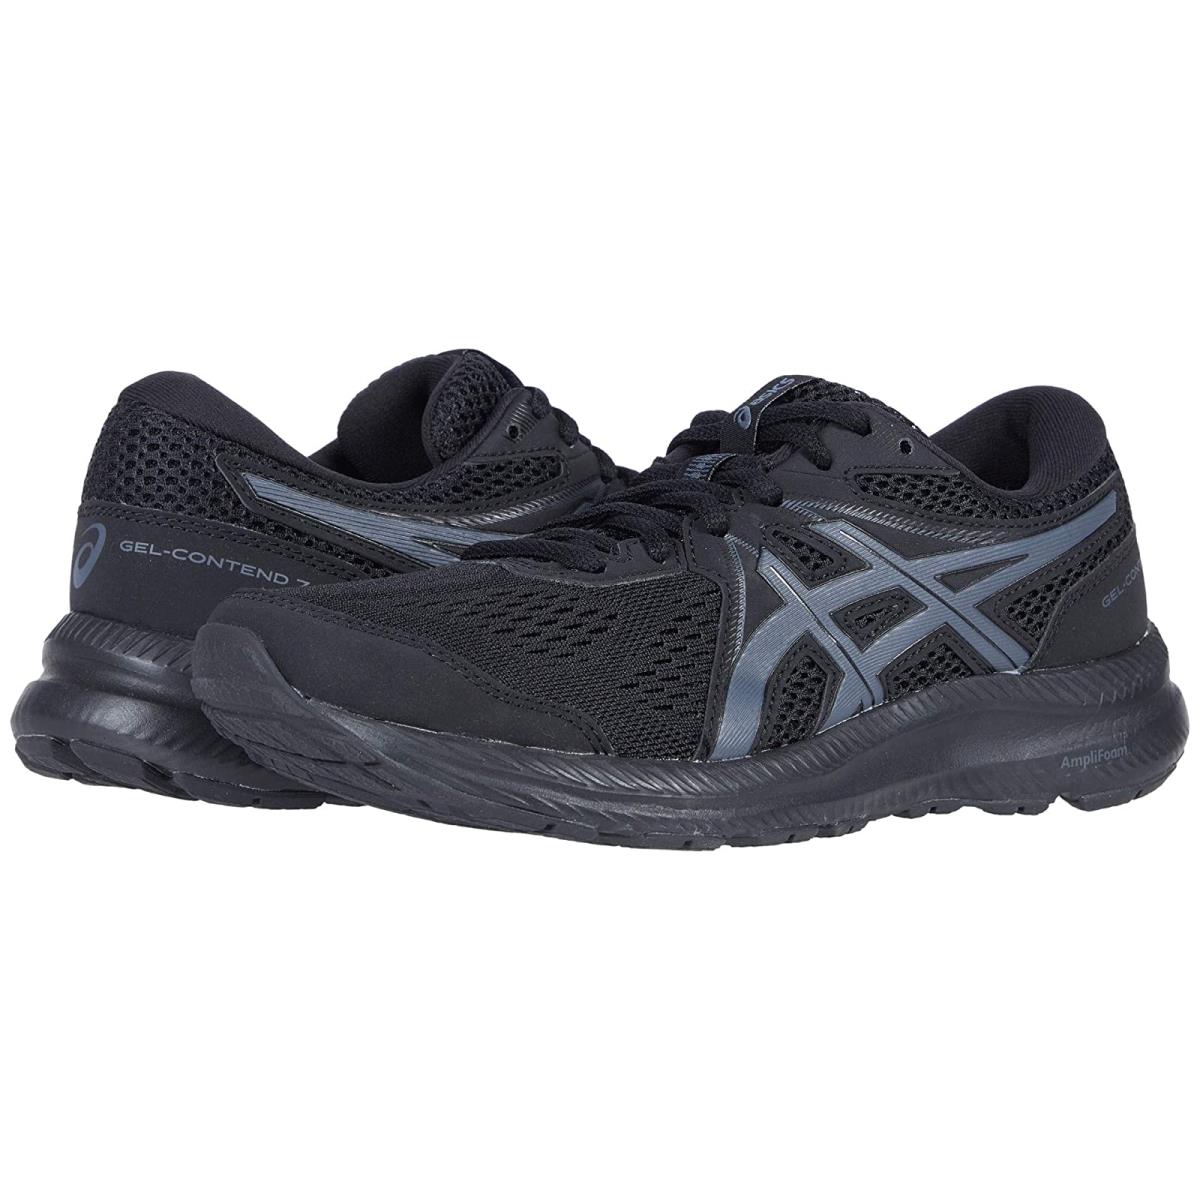 Woman`s Sneakers Athletic Shoes Asics Gel-contend 7 Black/Carrier Grey